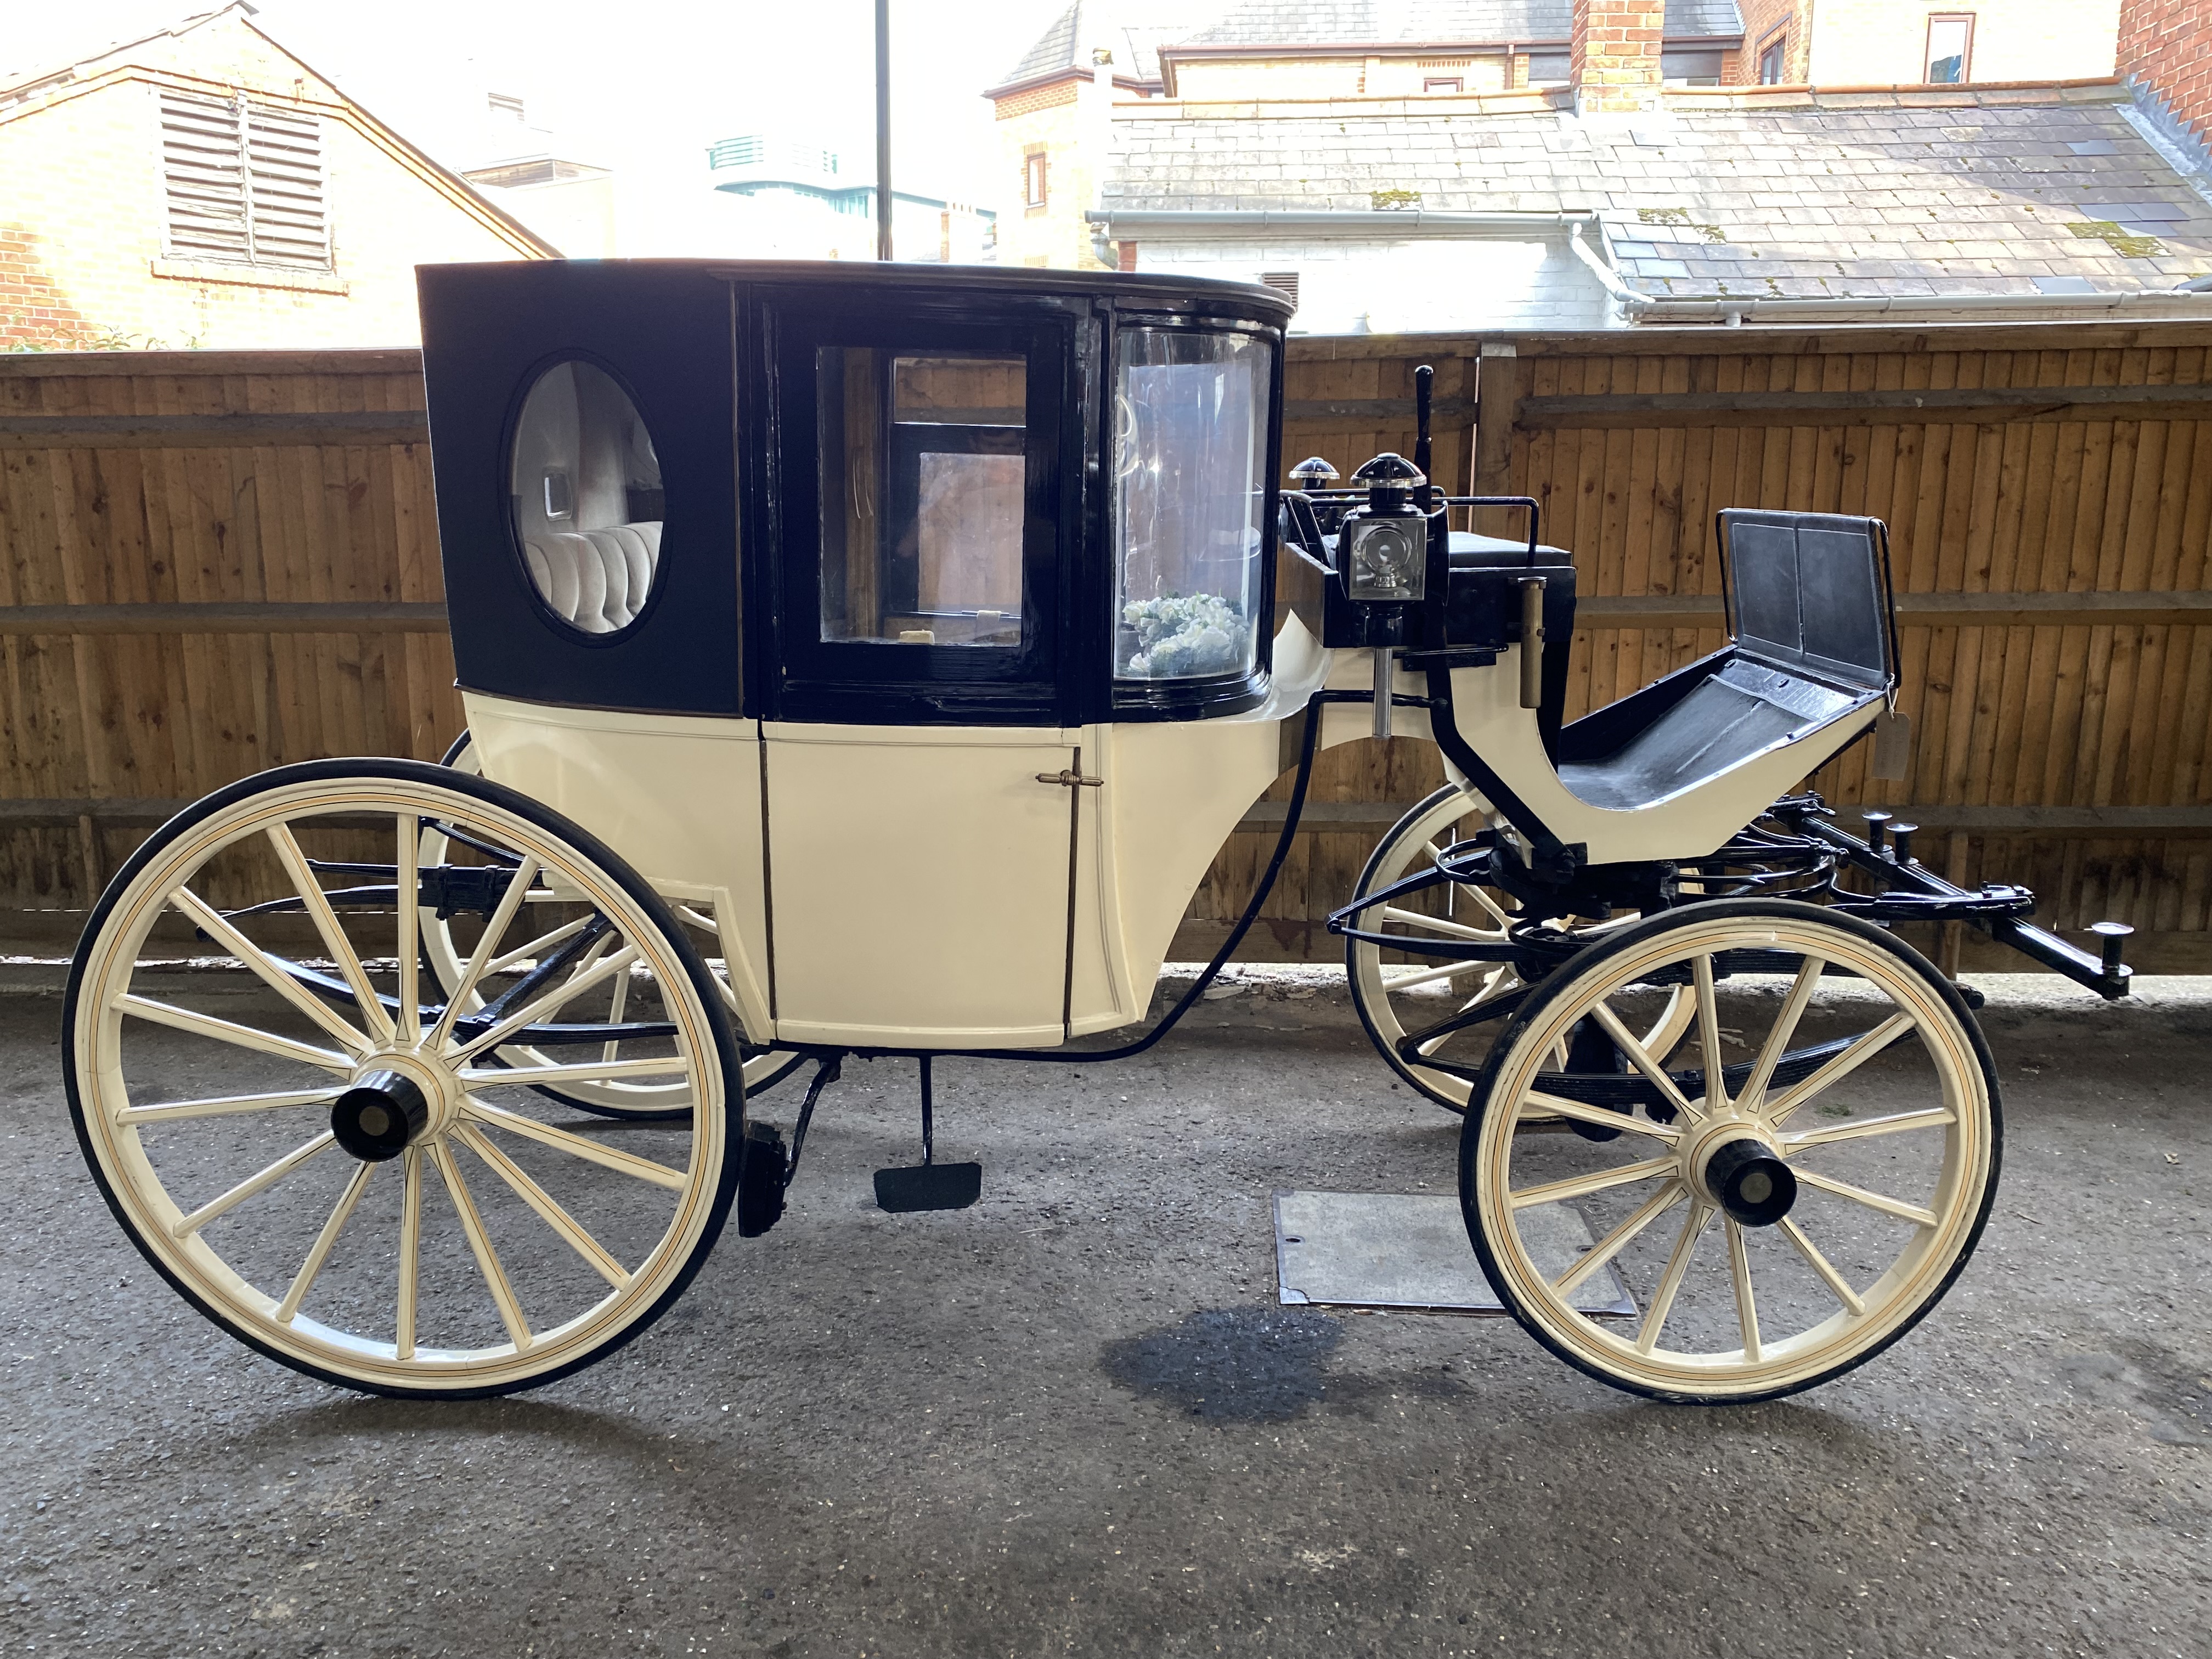 BOW FRONTED BROUGHAM built in France circa 1890. Finished in cream with beige and black lining. On